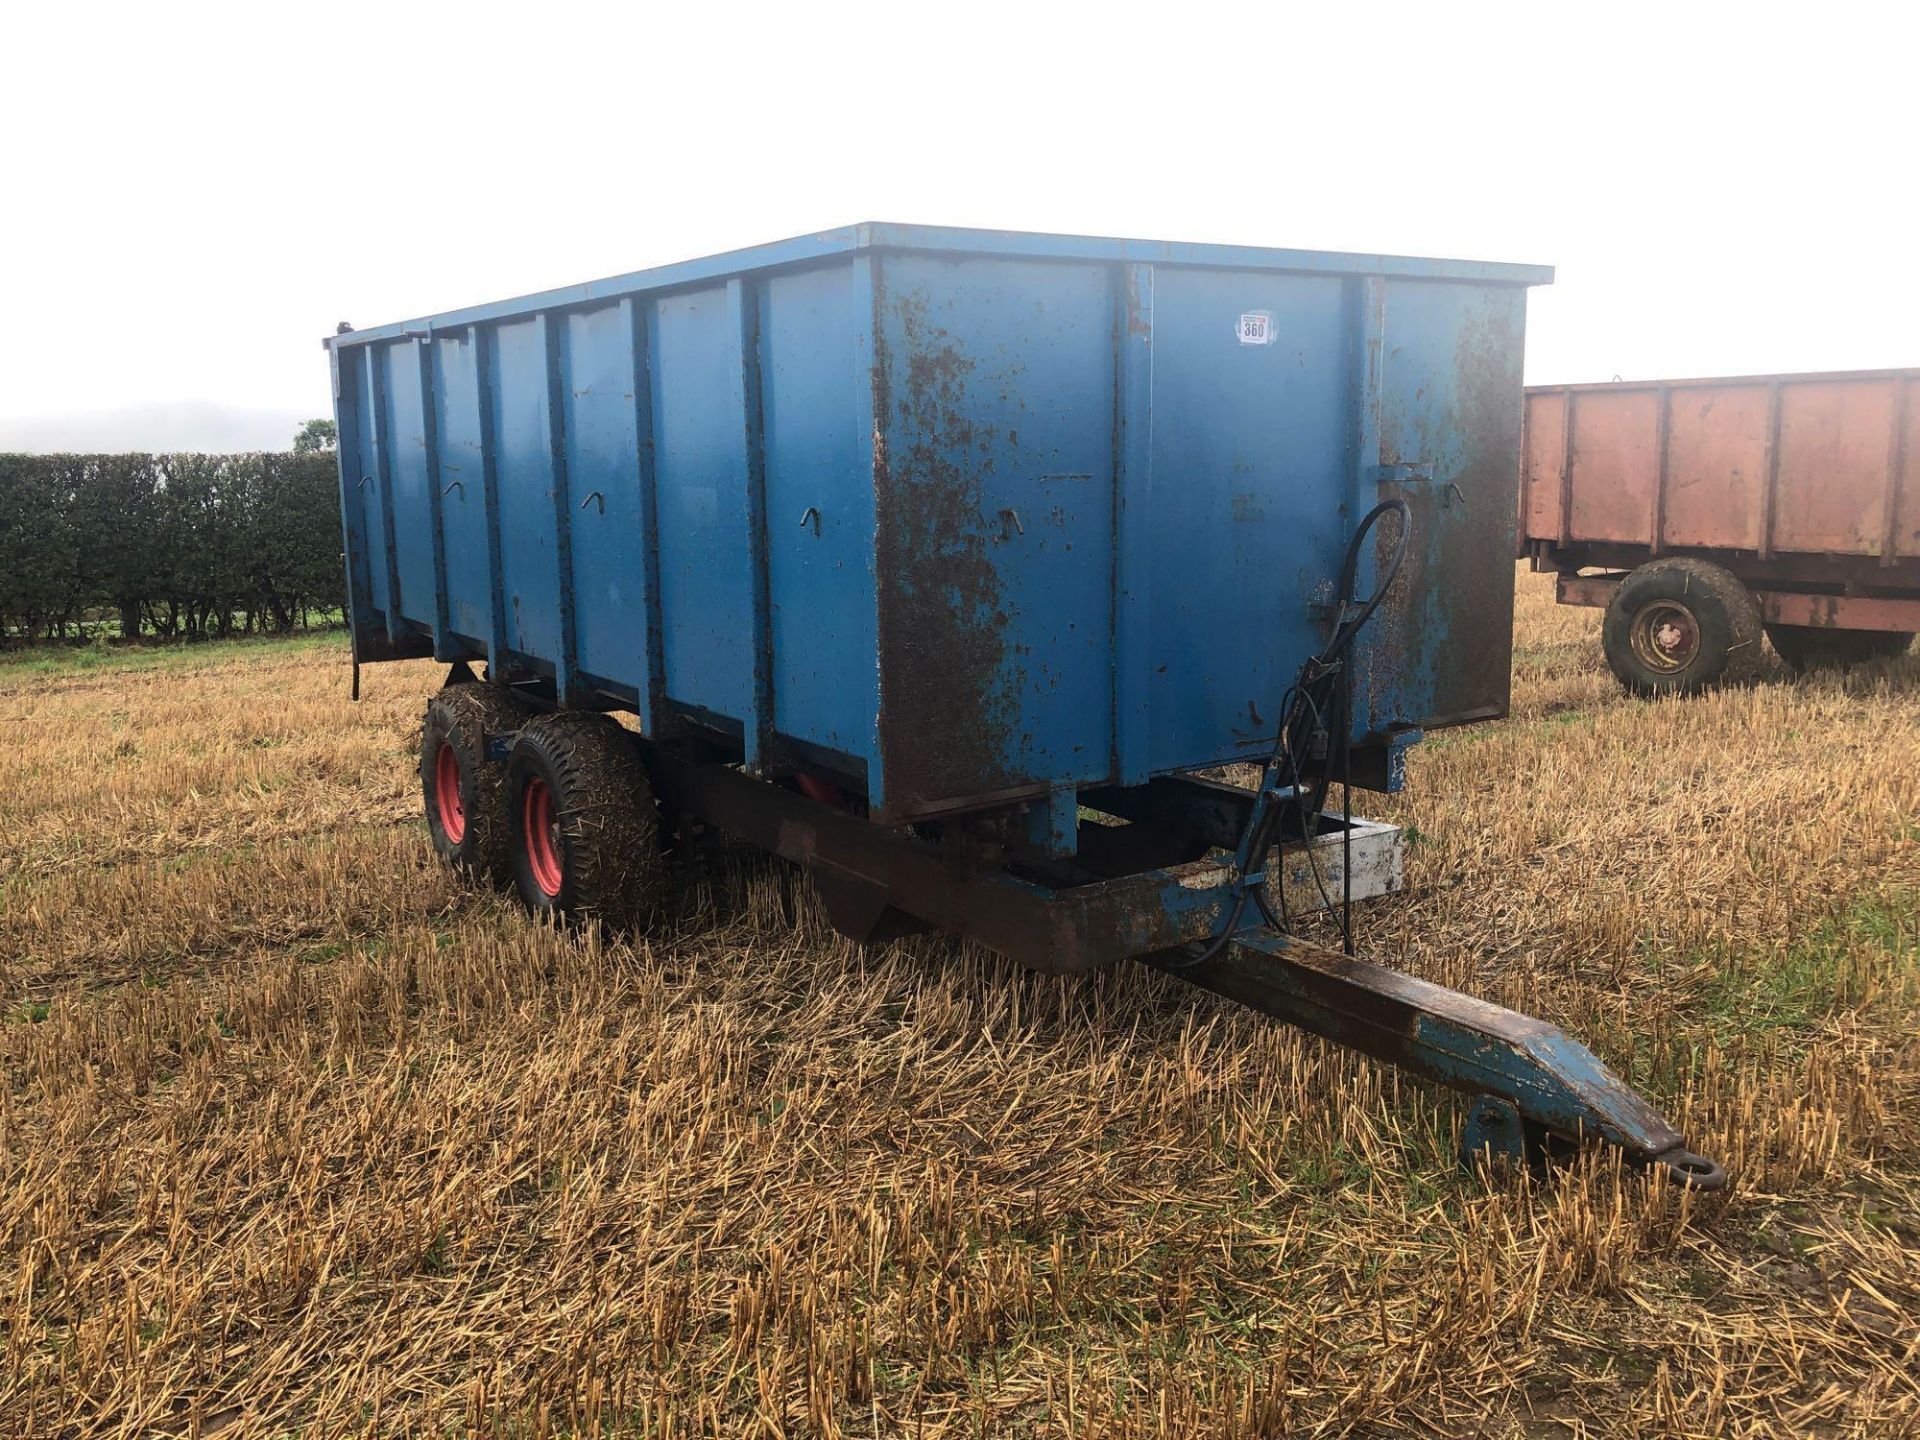 8t twin axle trailer with manual rear door and grain chute. C/w silage sides. On 12.5/80-15.3 wheels - Image 2 of 8